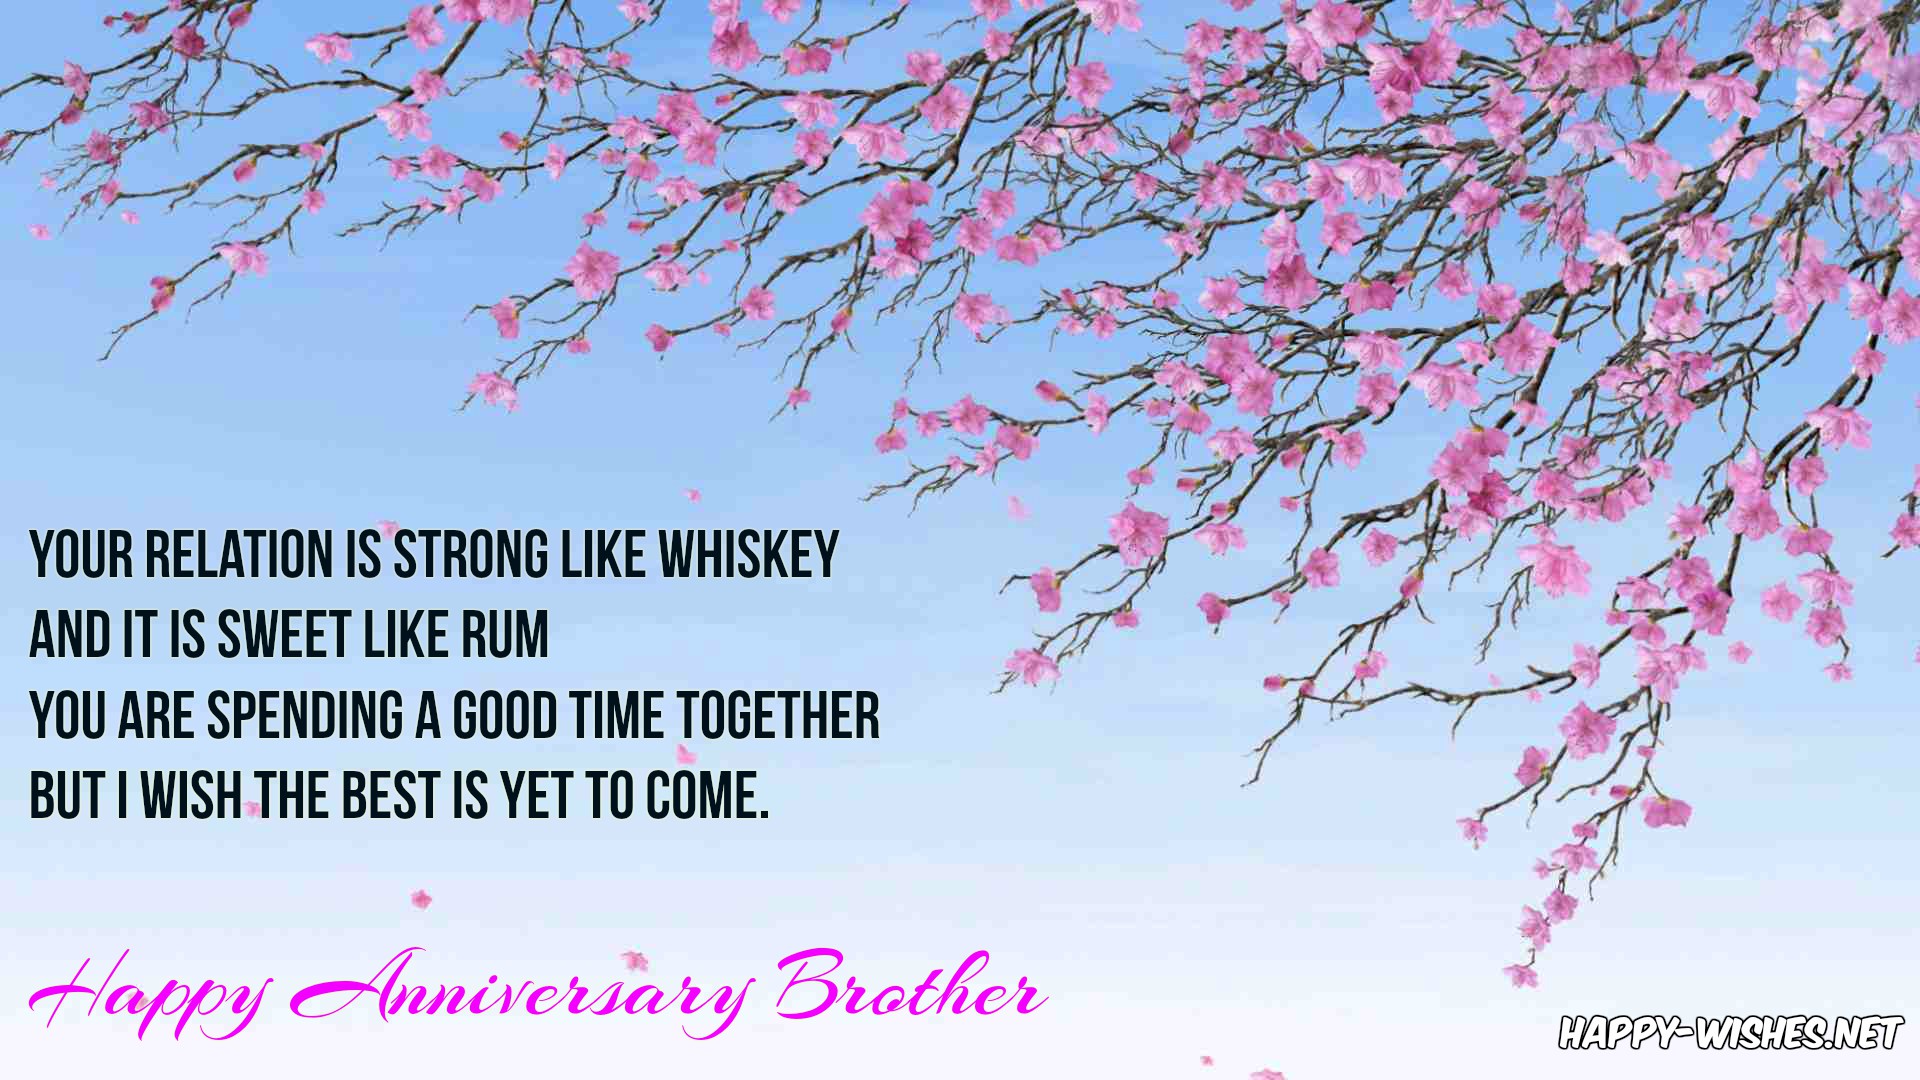 Happy Anniversary wishes for brother